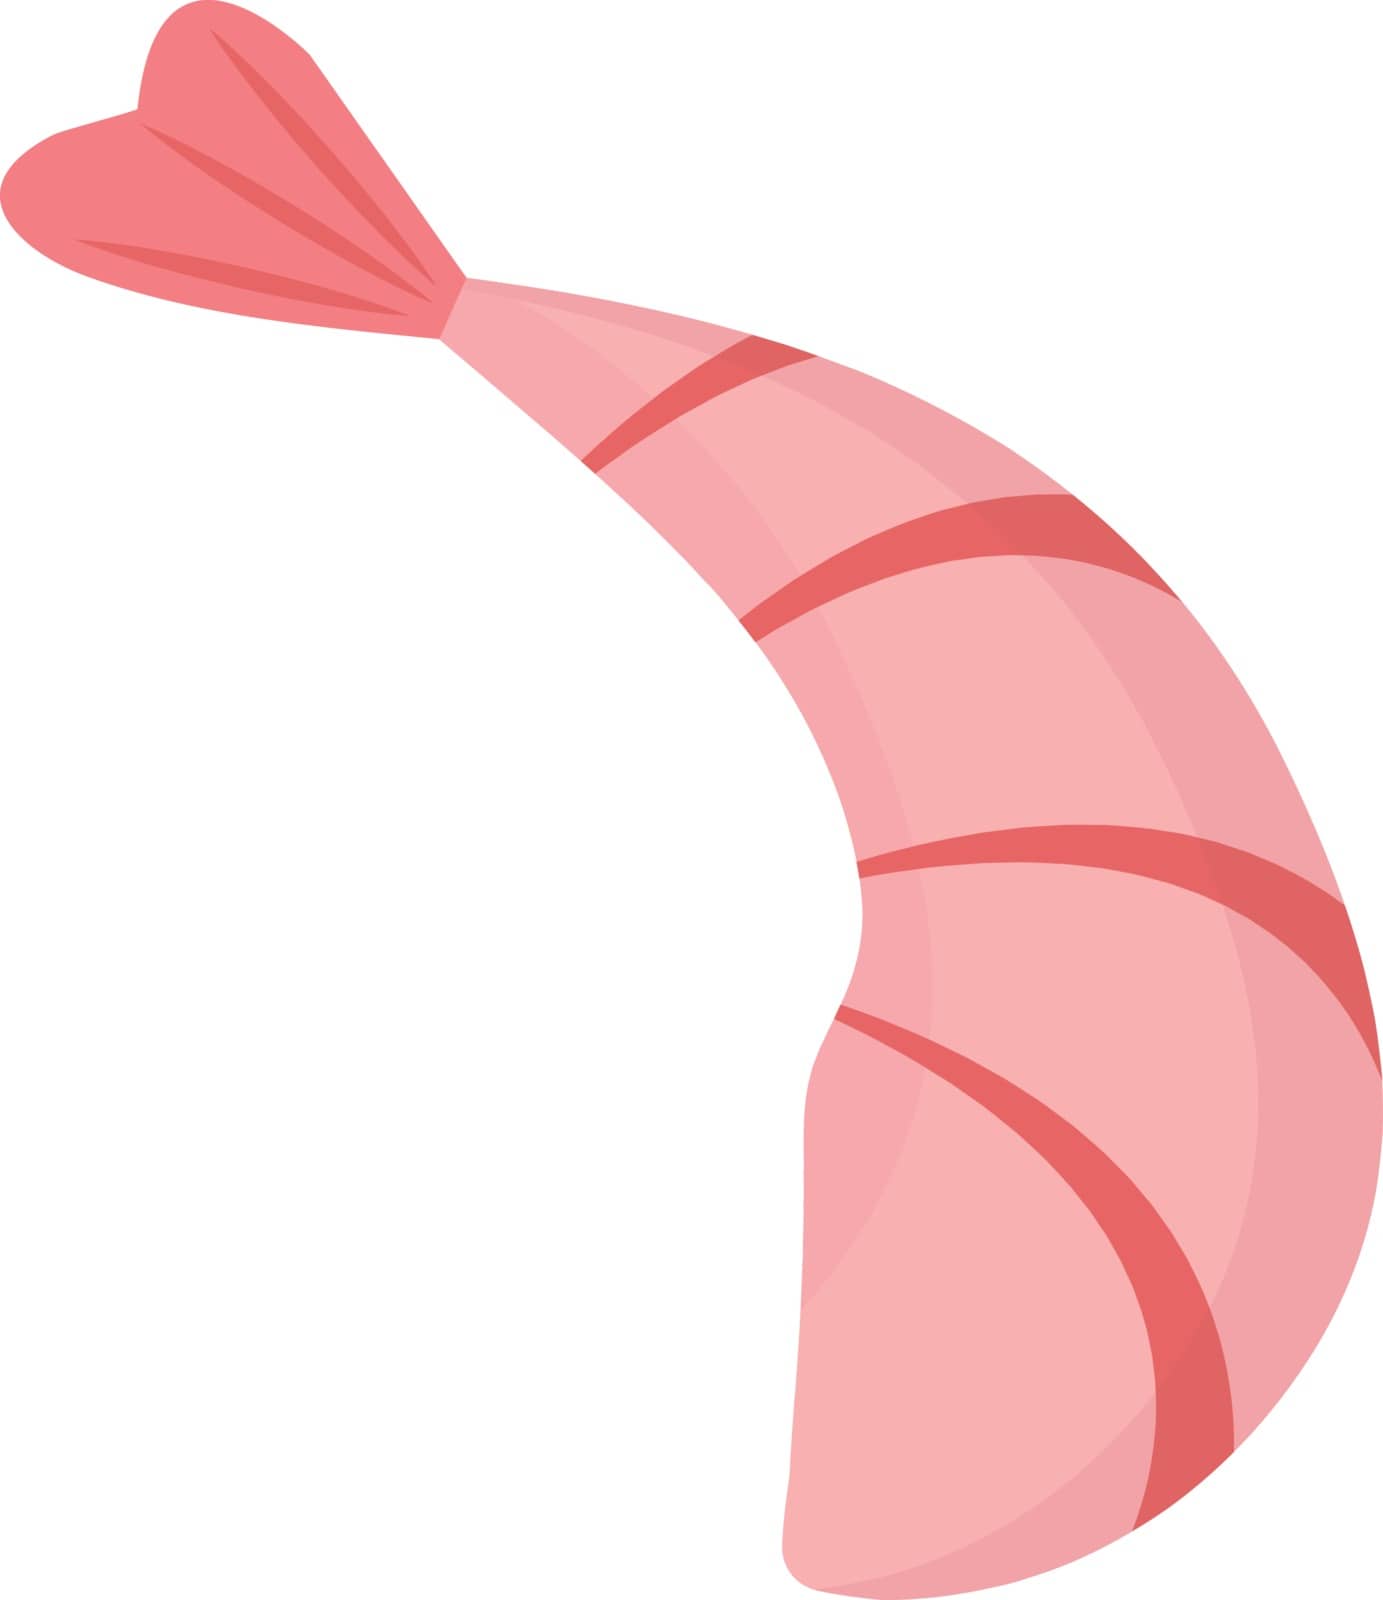 Shrimp icon flat style. Prawn isolated on white background. Vector illustration, clip art. by lucia_fox